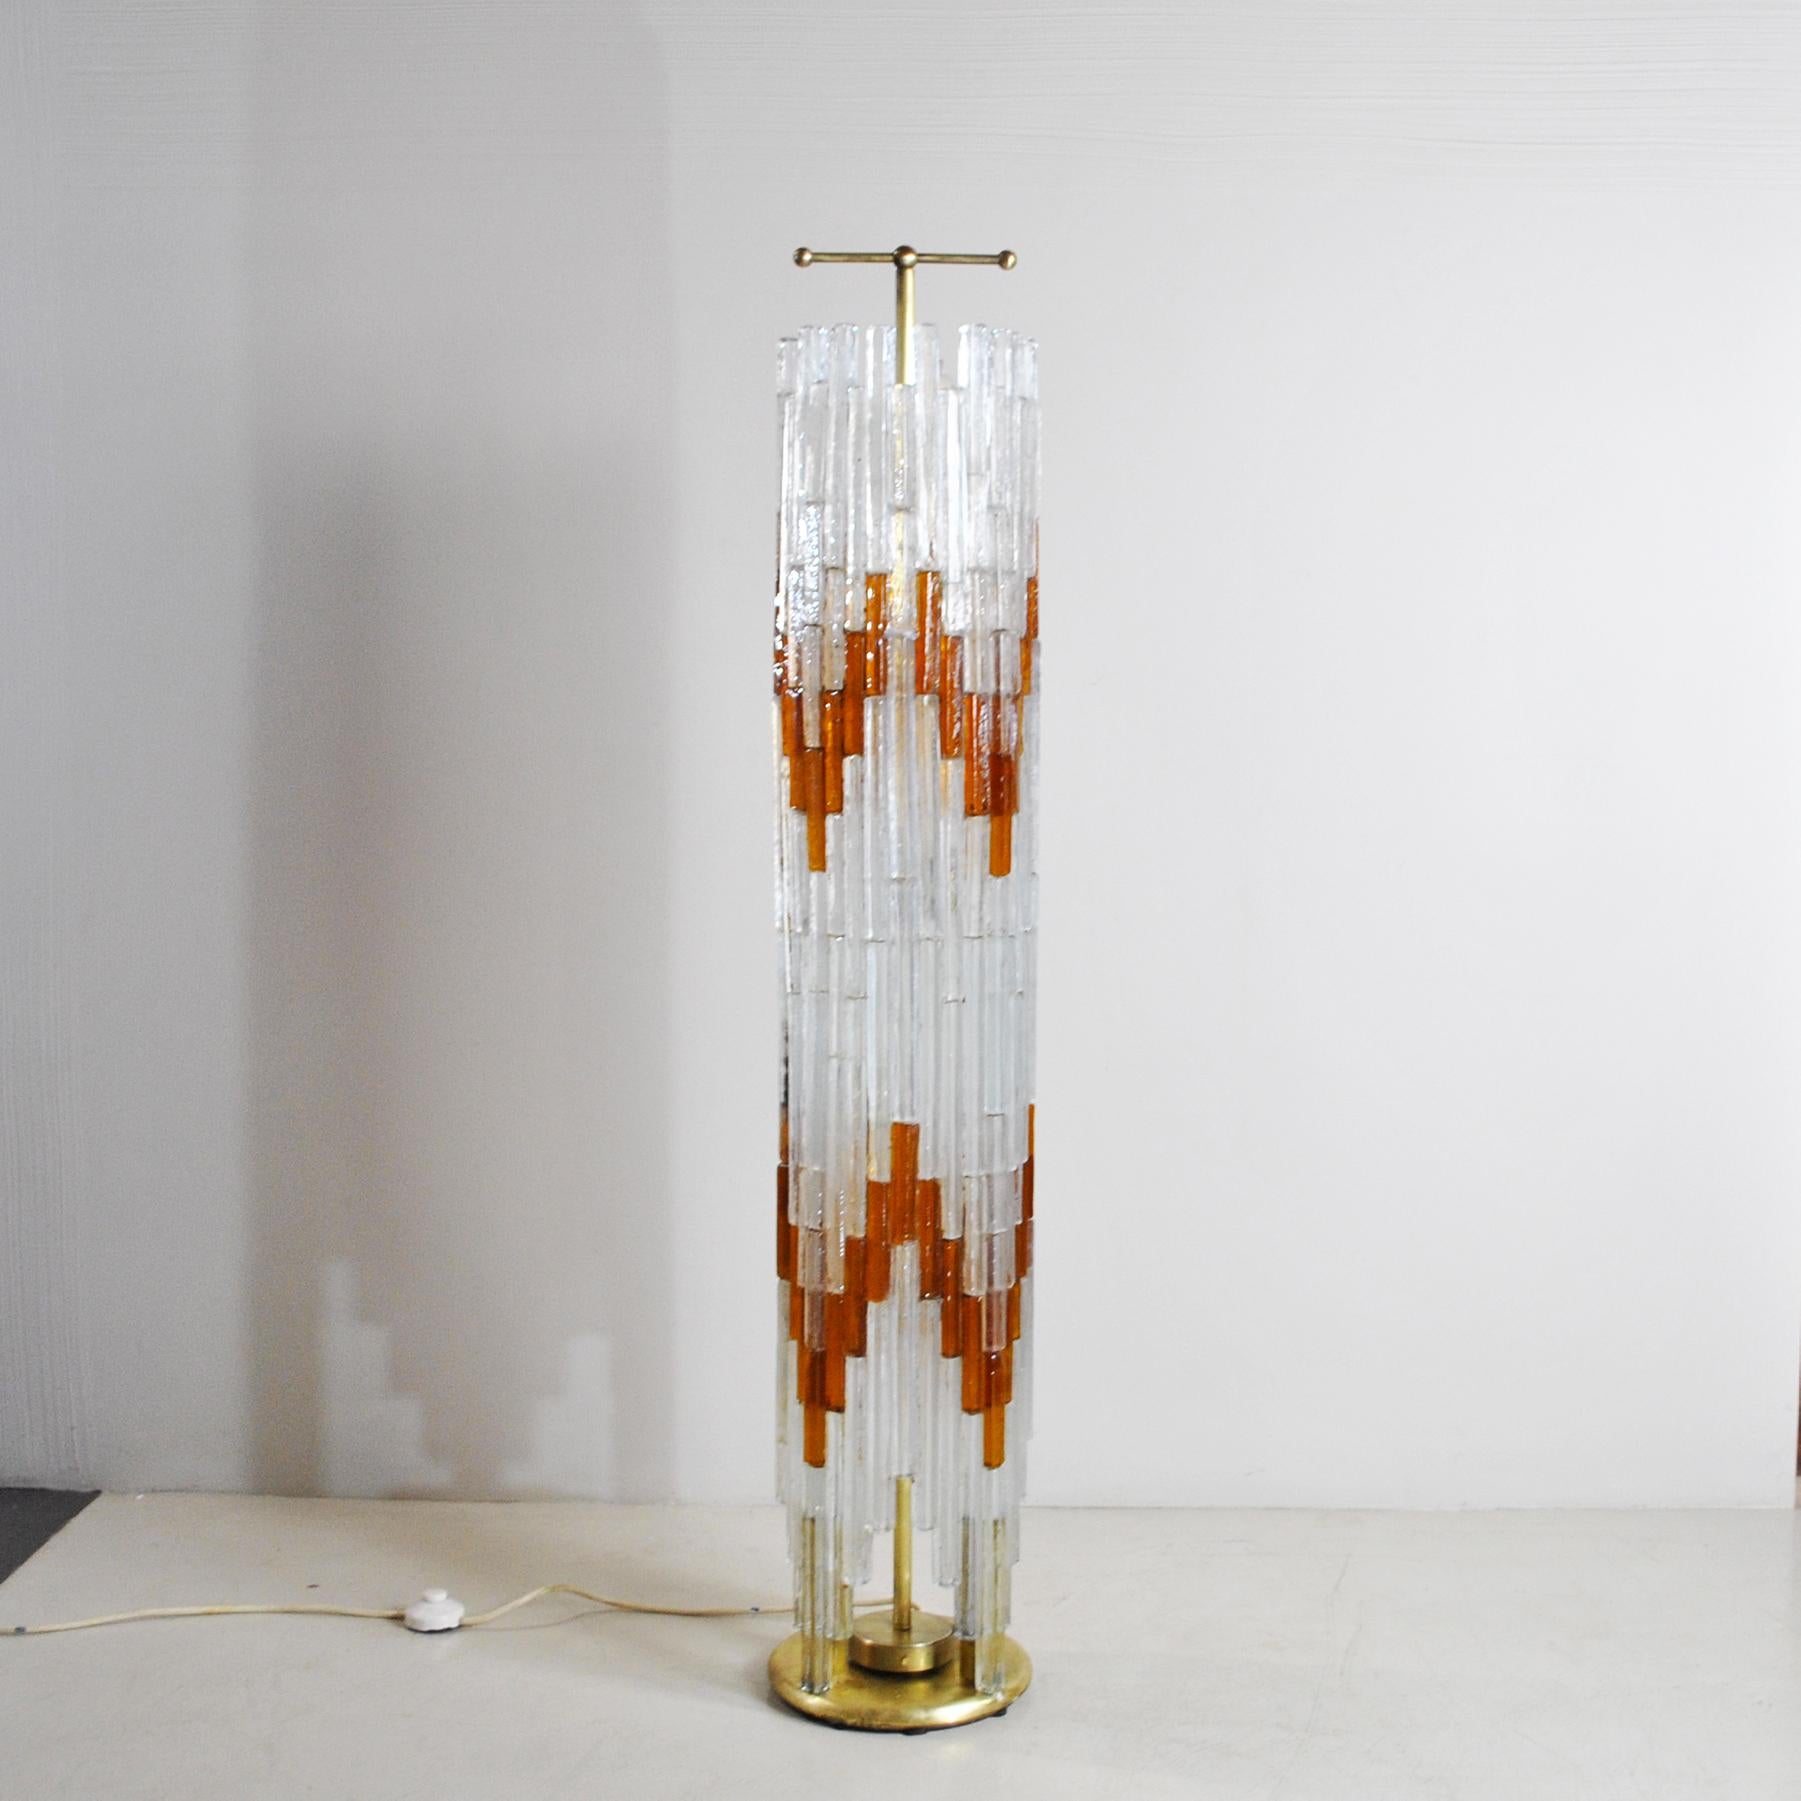 Superb floor lamp composed of ice and orange colored Murano glass parallelepipeds, designed by Albano Poli for the Poliarte glass factory, produced in the late 60s and early 70s.